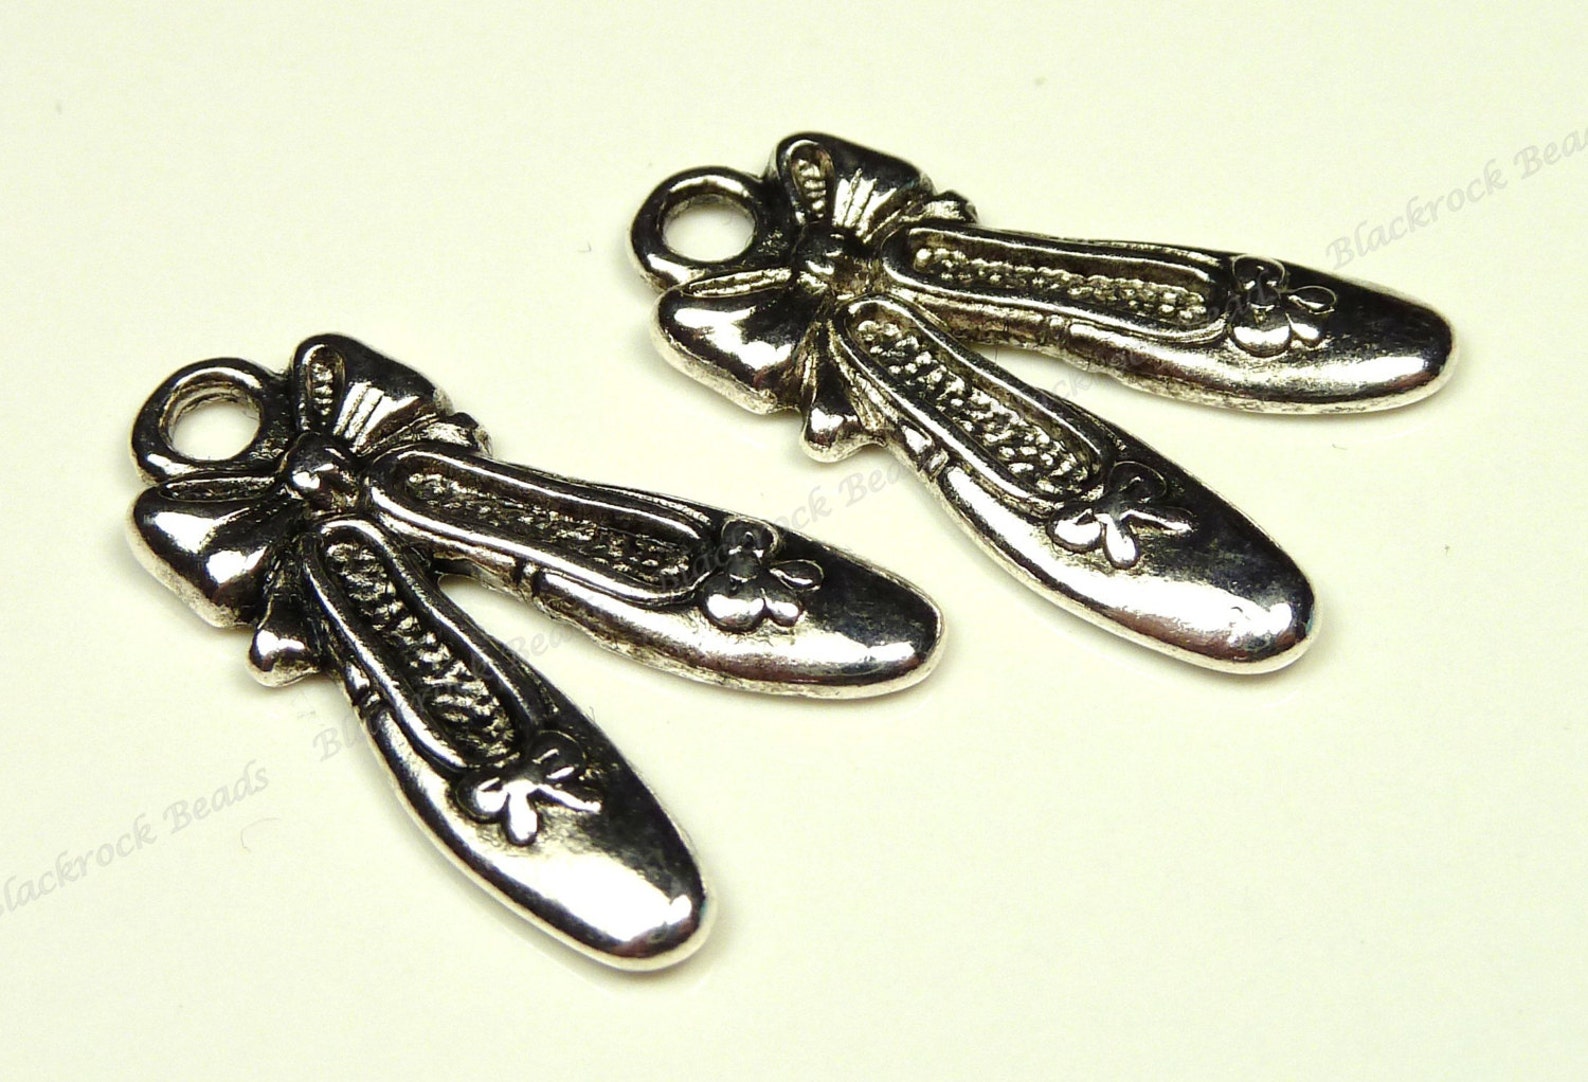 10 antique silver tone ballet shoe 21x12mm metal charms - findings, jewelry supplies, ballerina slippers - bt5